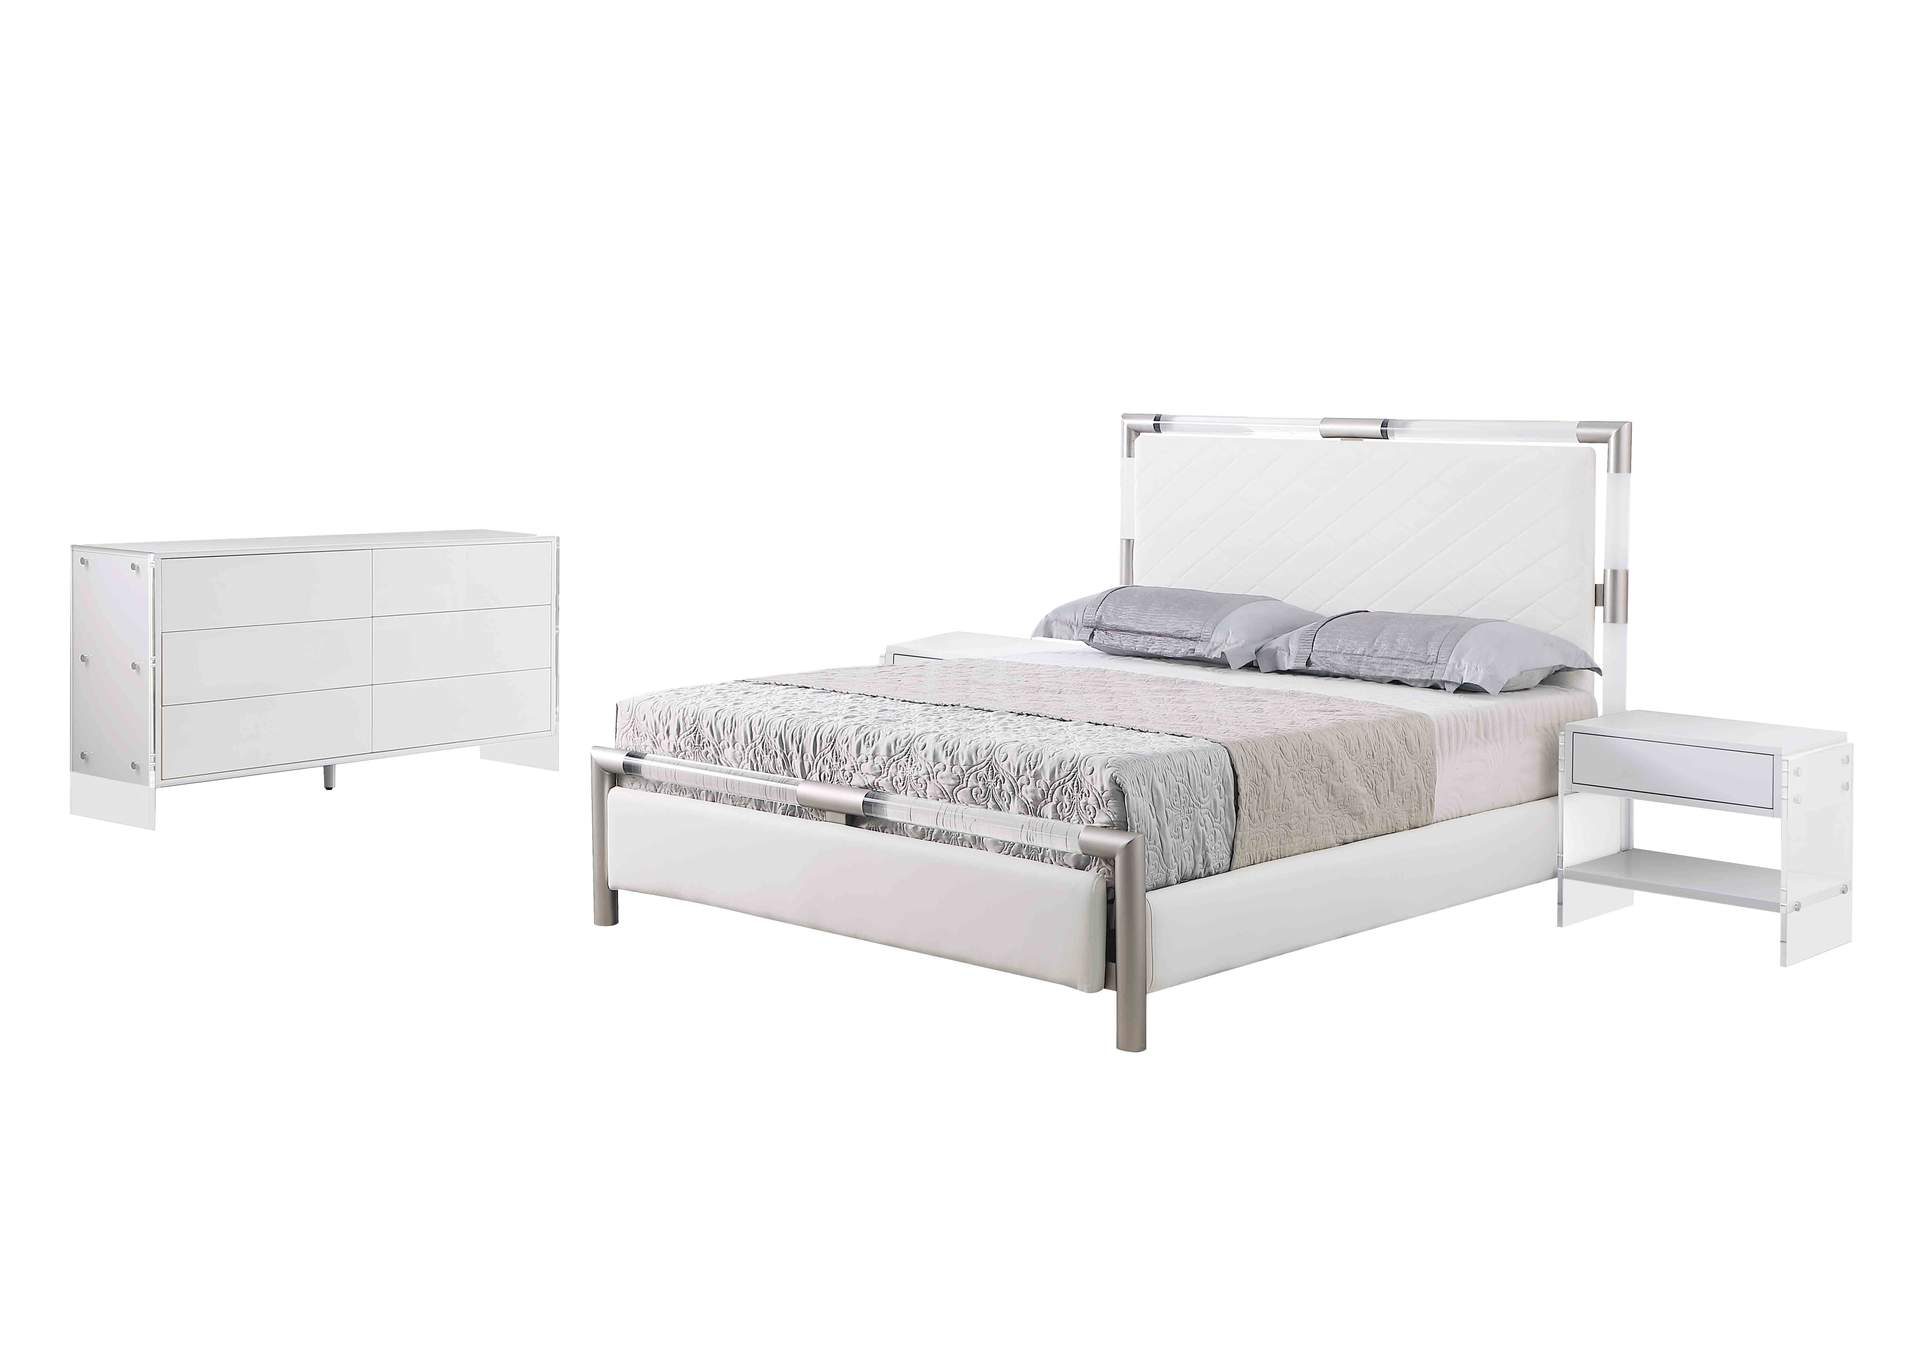 Diamond Stitched Upholstered Queen Bed Headboard & Footboard,Chintaly Imports